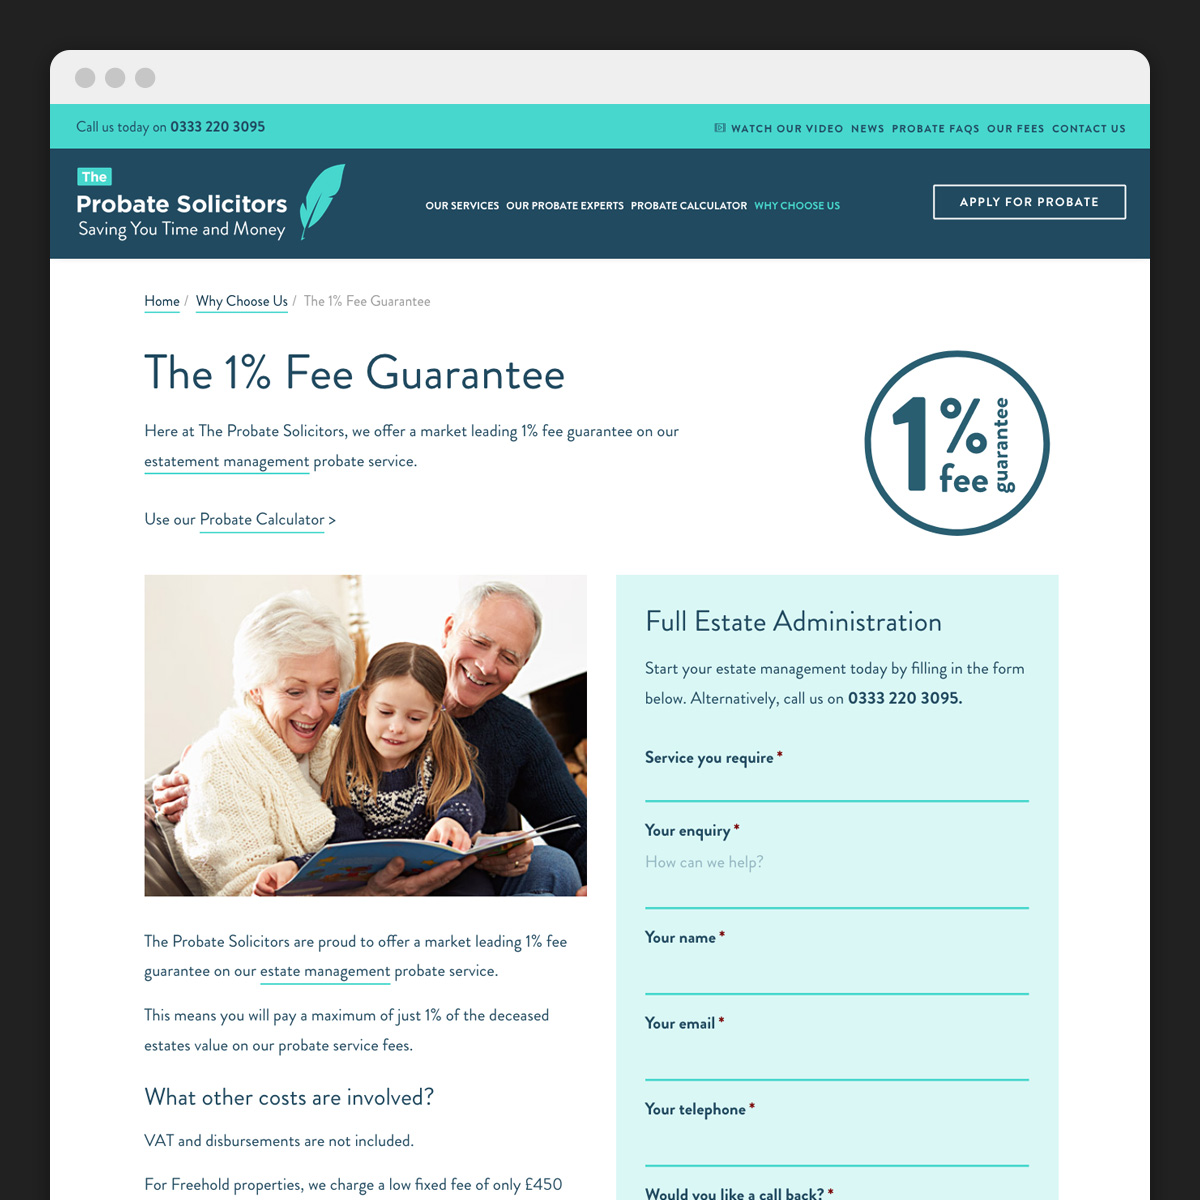 The Probate Solicitors 1% Fee Guarantee